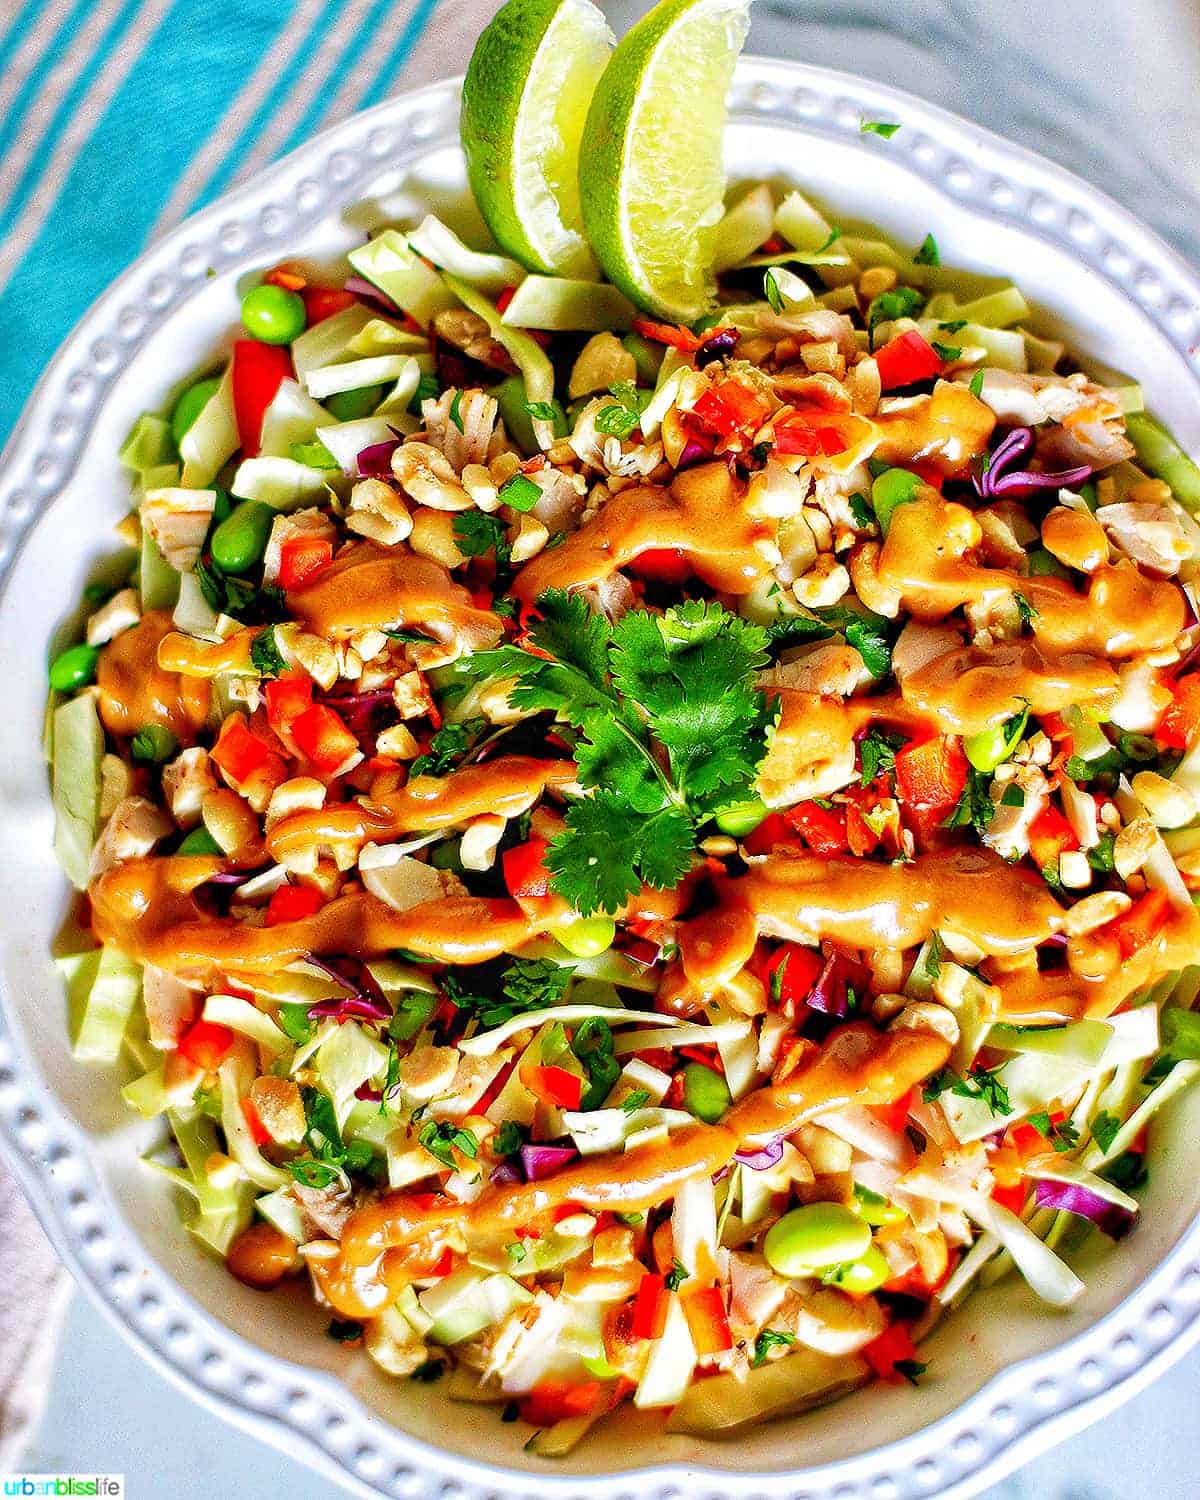 Chicken salad with crunchy vegetables topped with peanut dressing and lime slices.